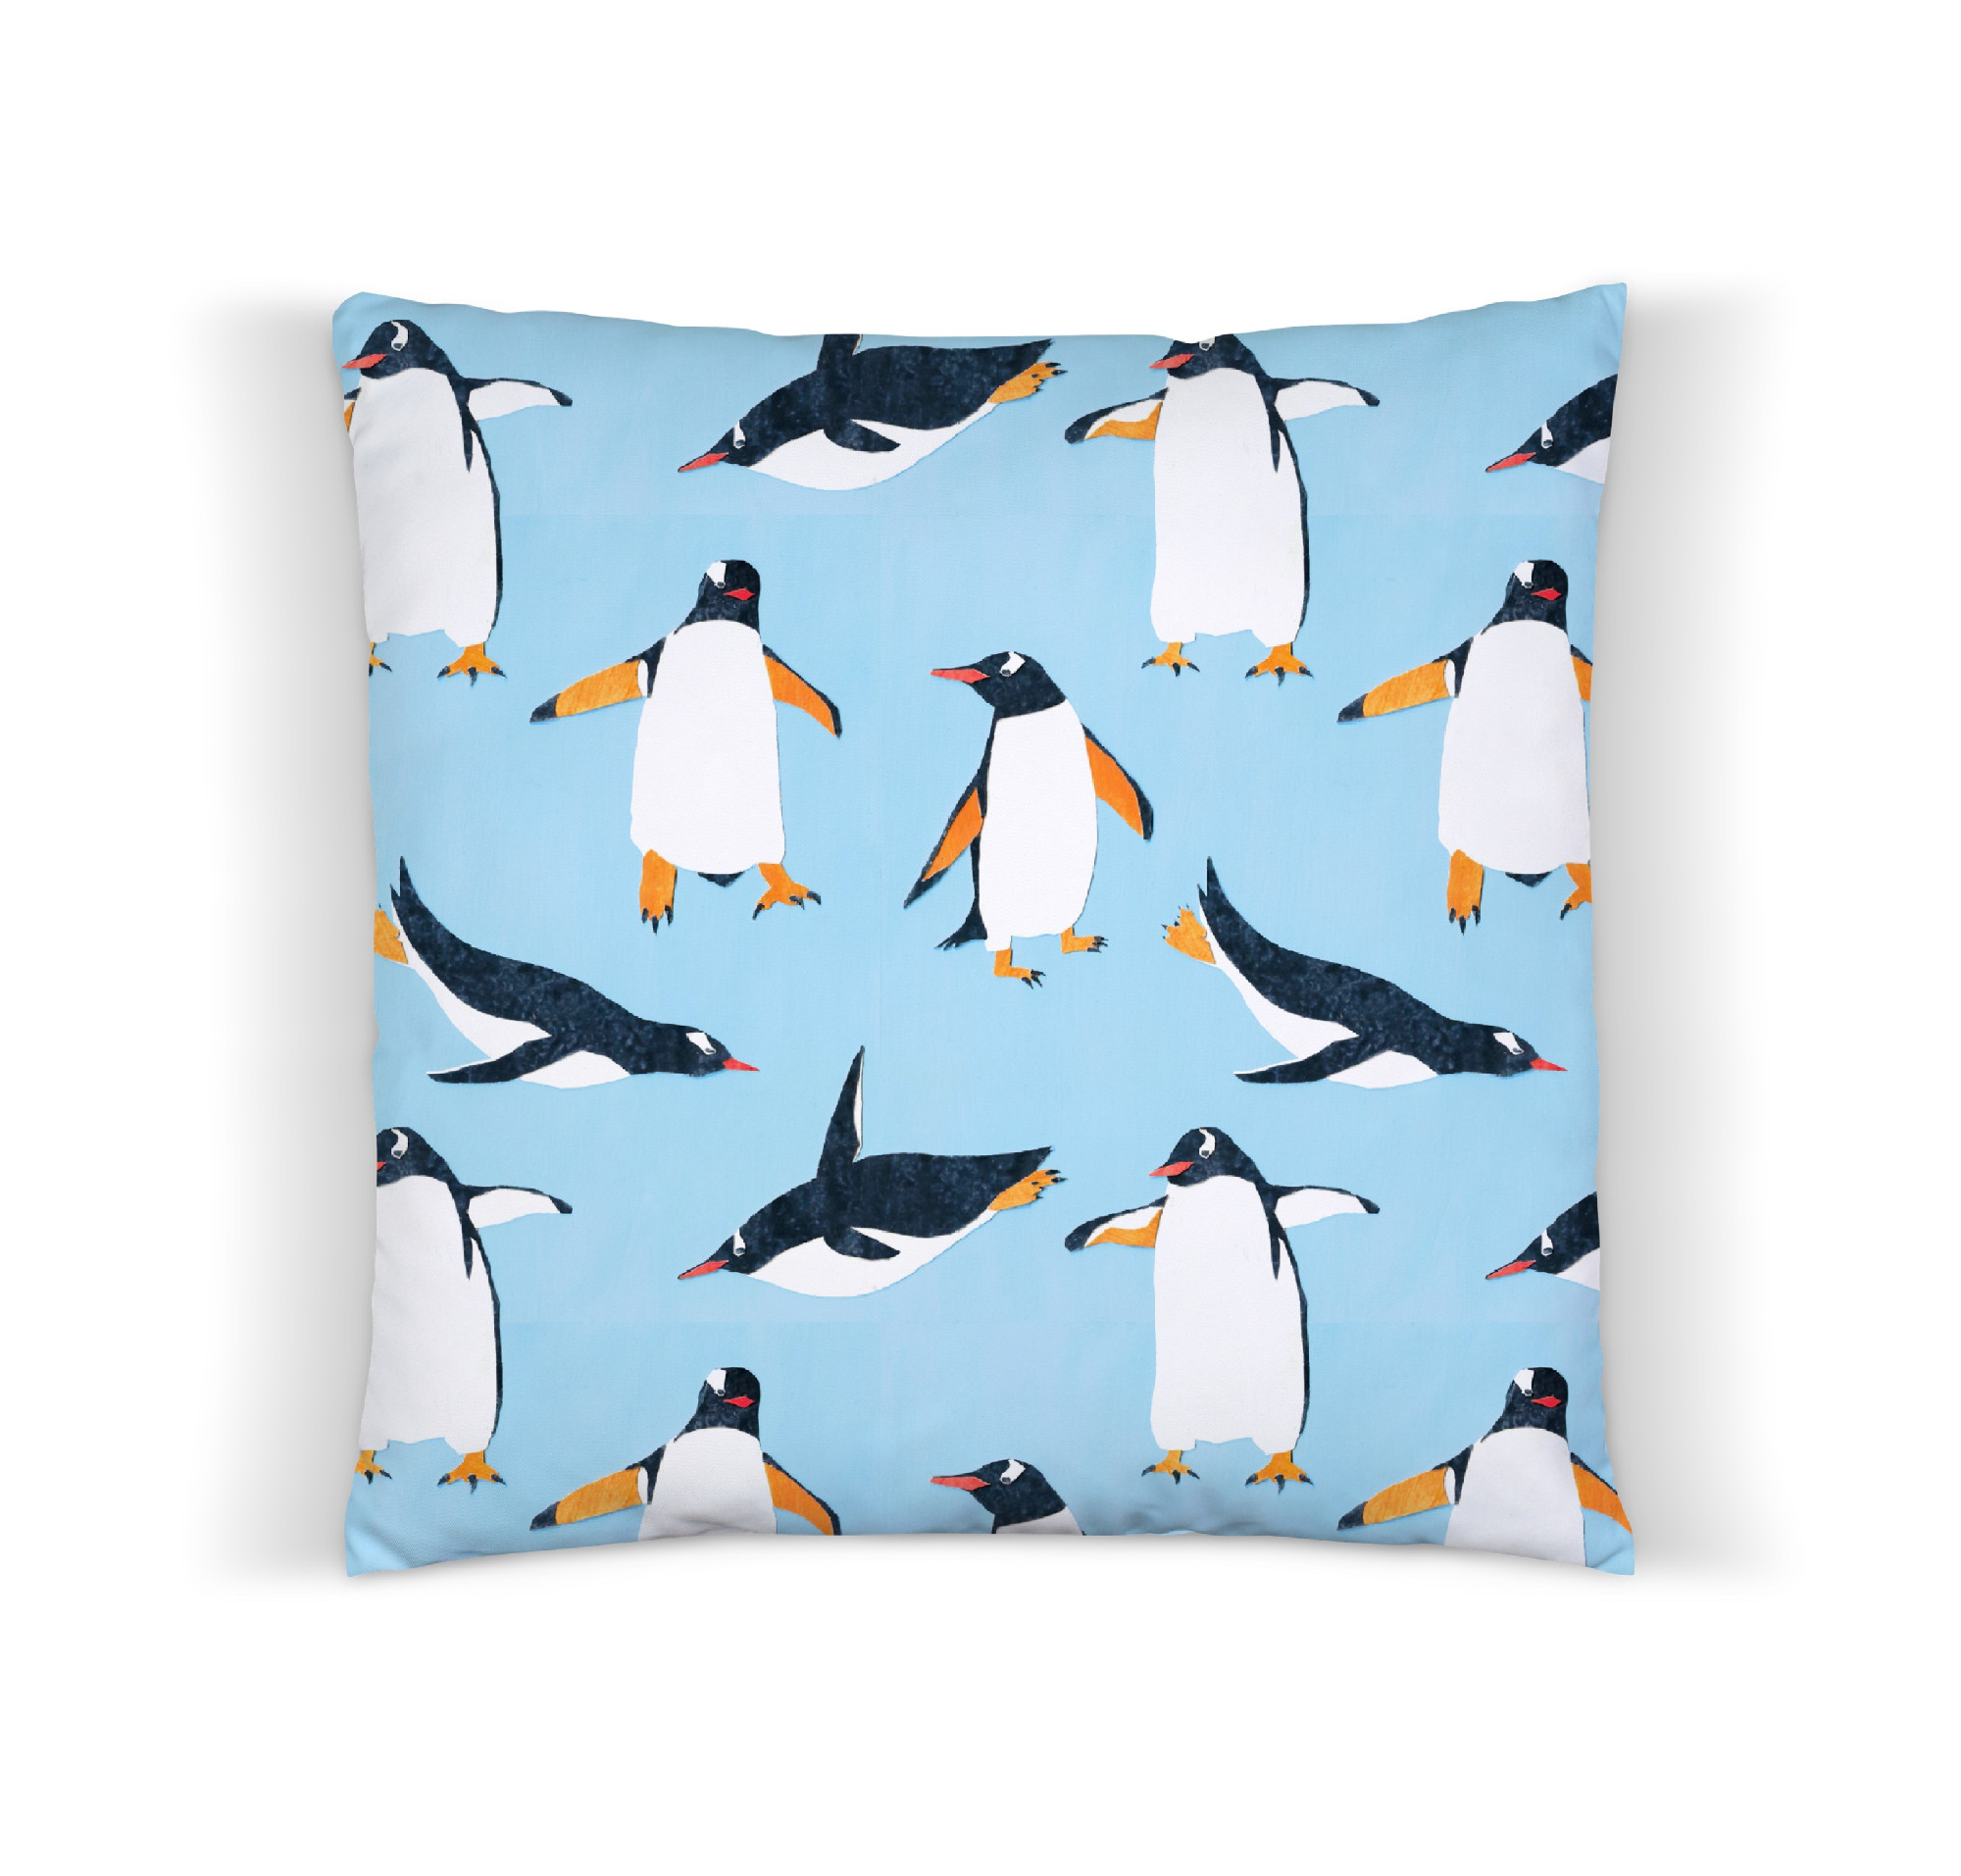 Penguin pattern created as part of a self-initiated project for ‘the Deep Hull’.